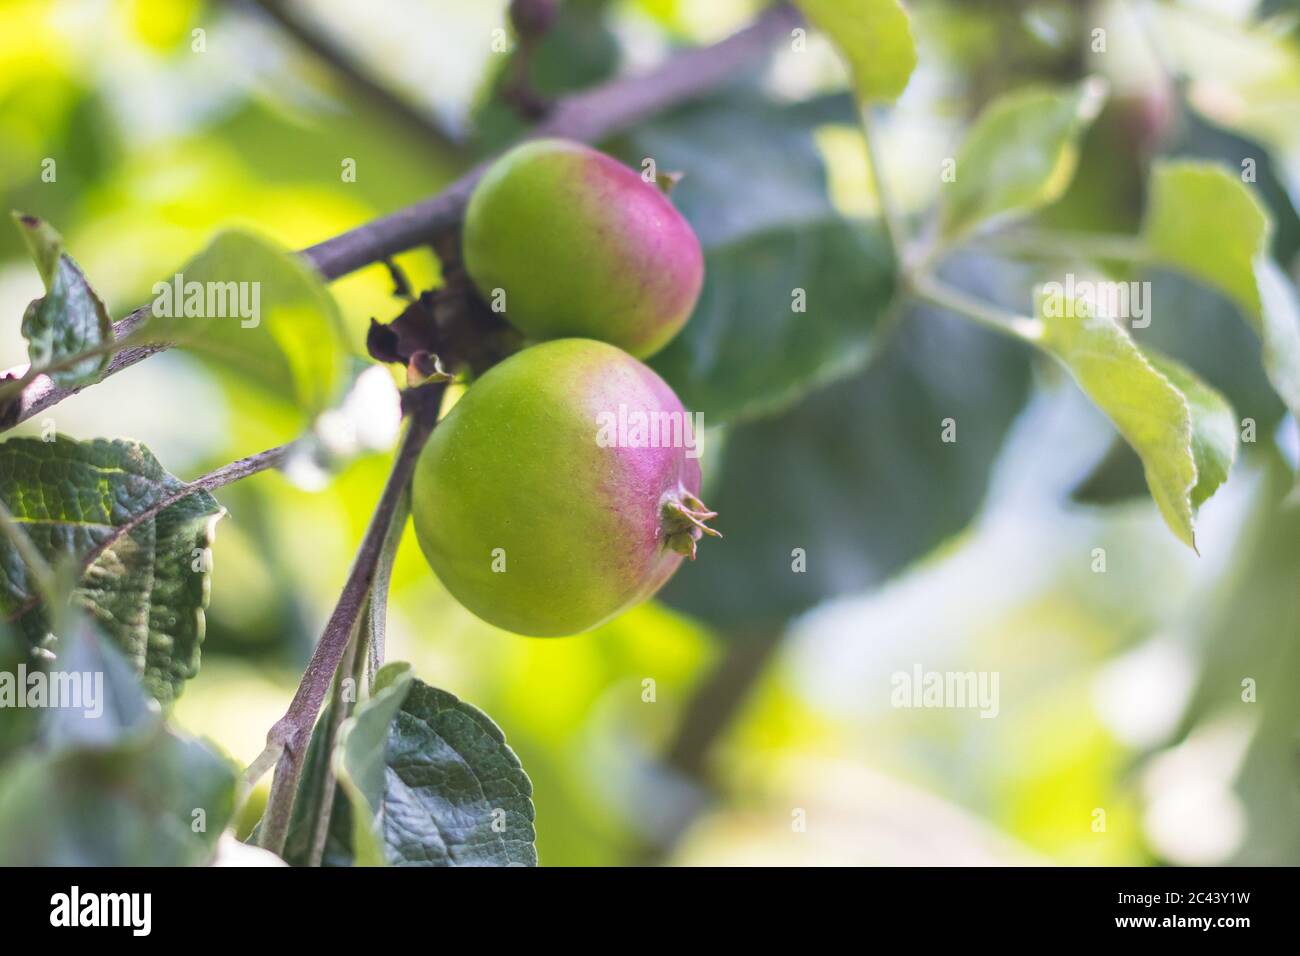 apples on a tree - close up view of a unripe apple on a branch with leaves Stock Photo